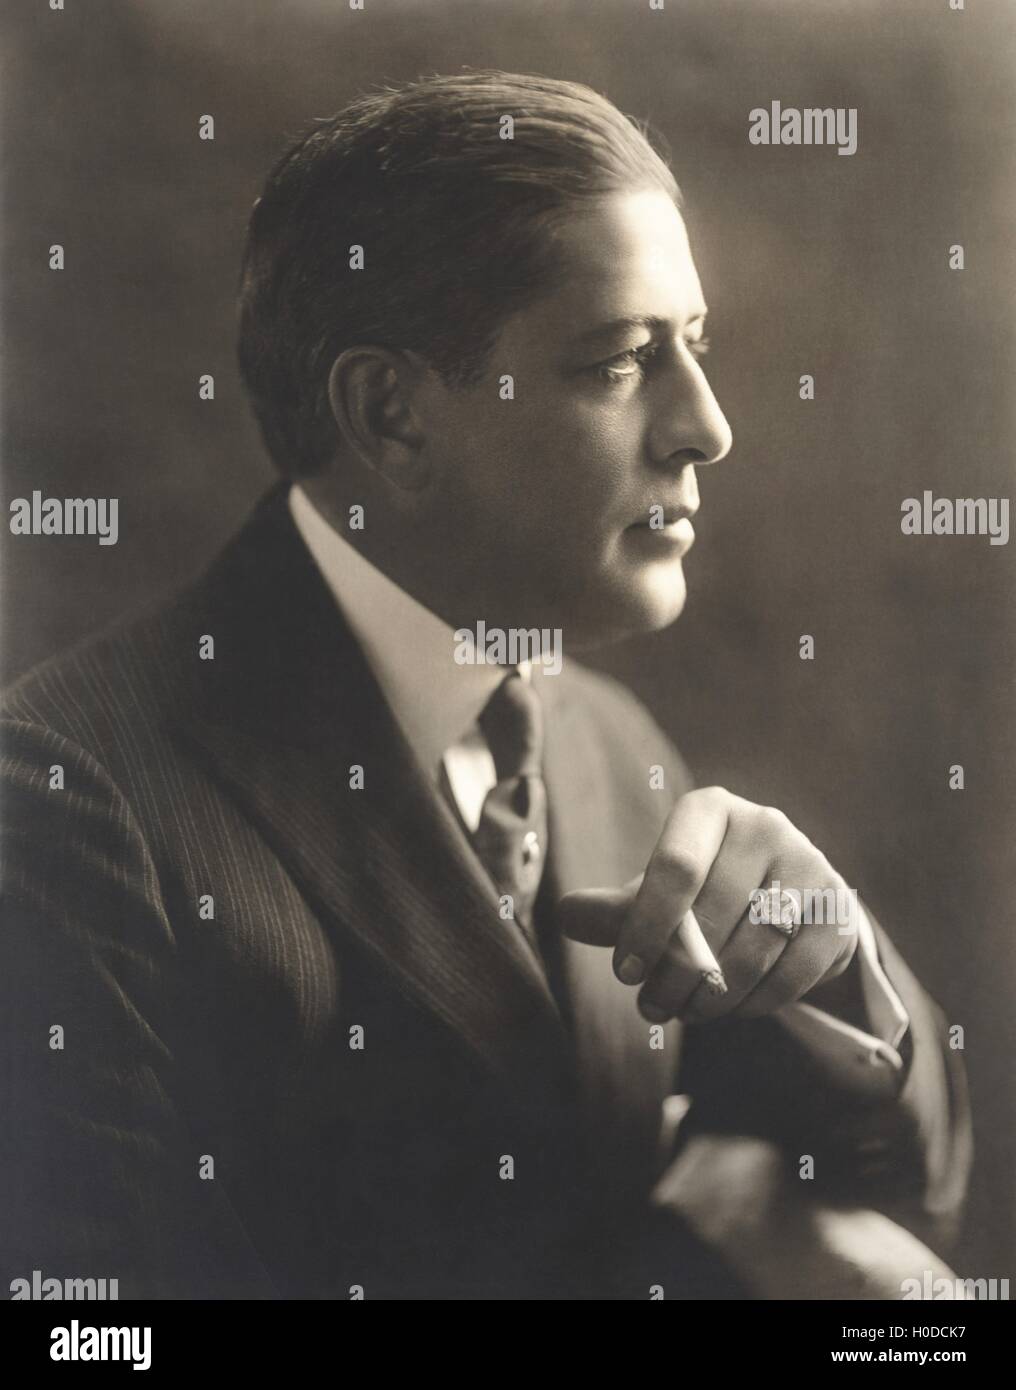 Portrait of a man with cigarette Stock Photo